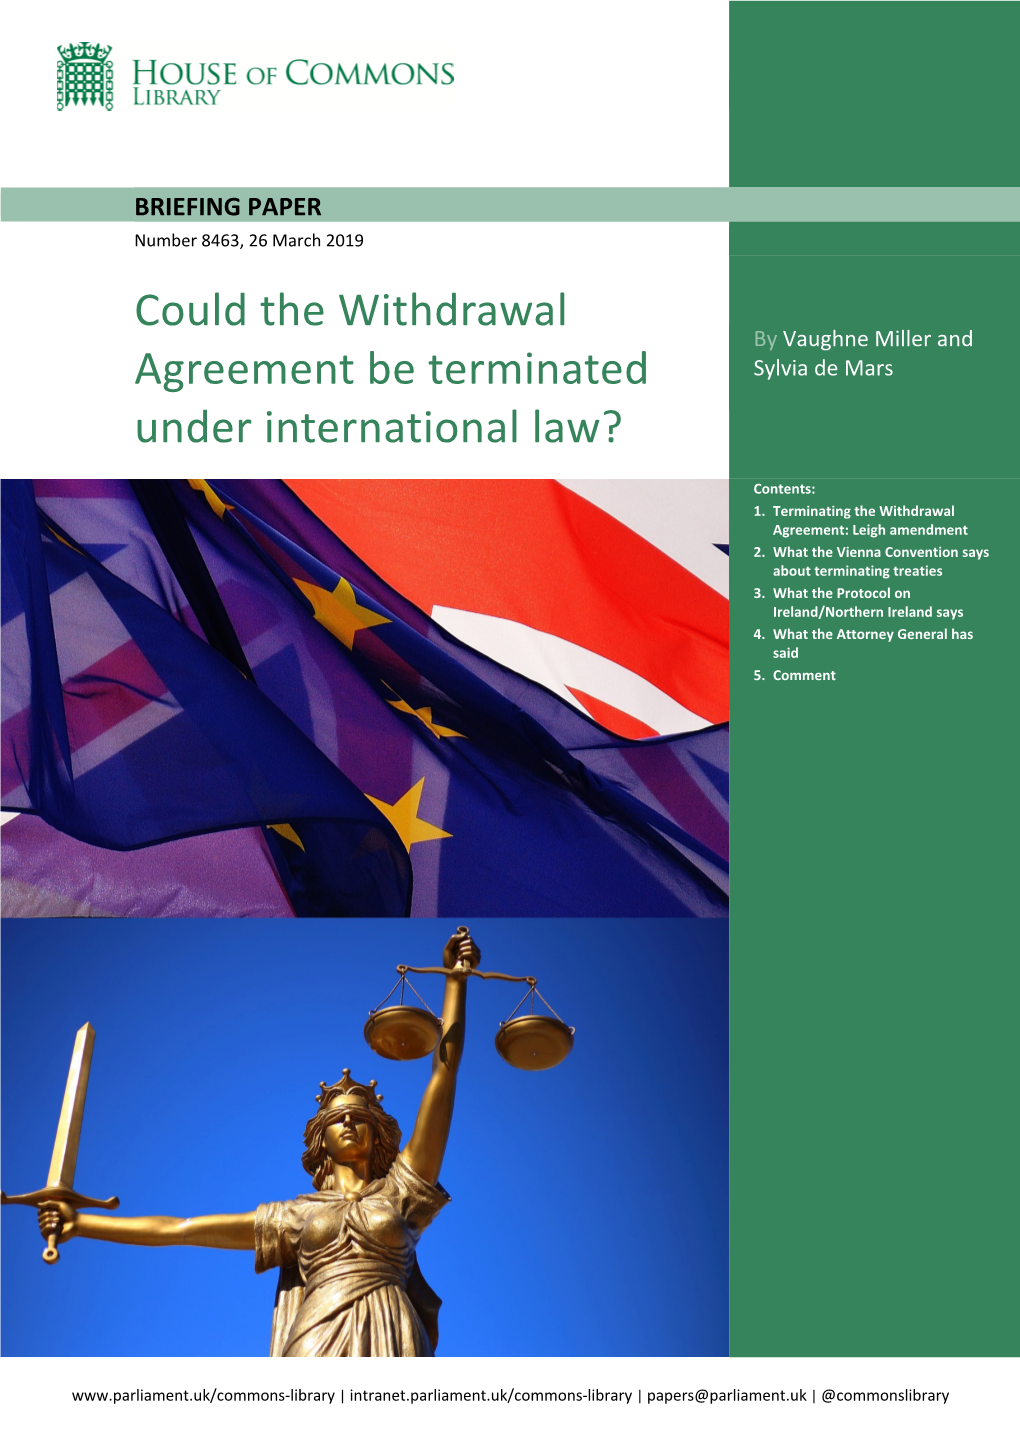 Could the Withdrawal Agreement Be Terminated Under International Law?